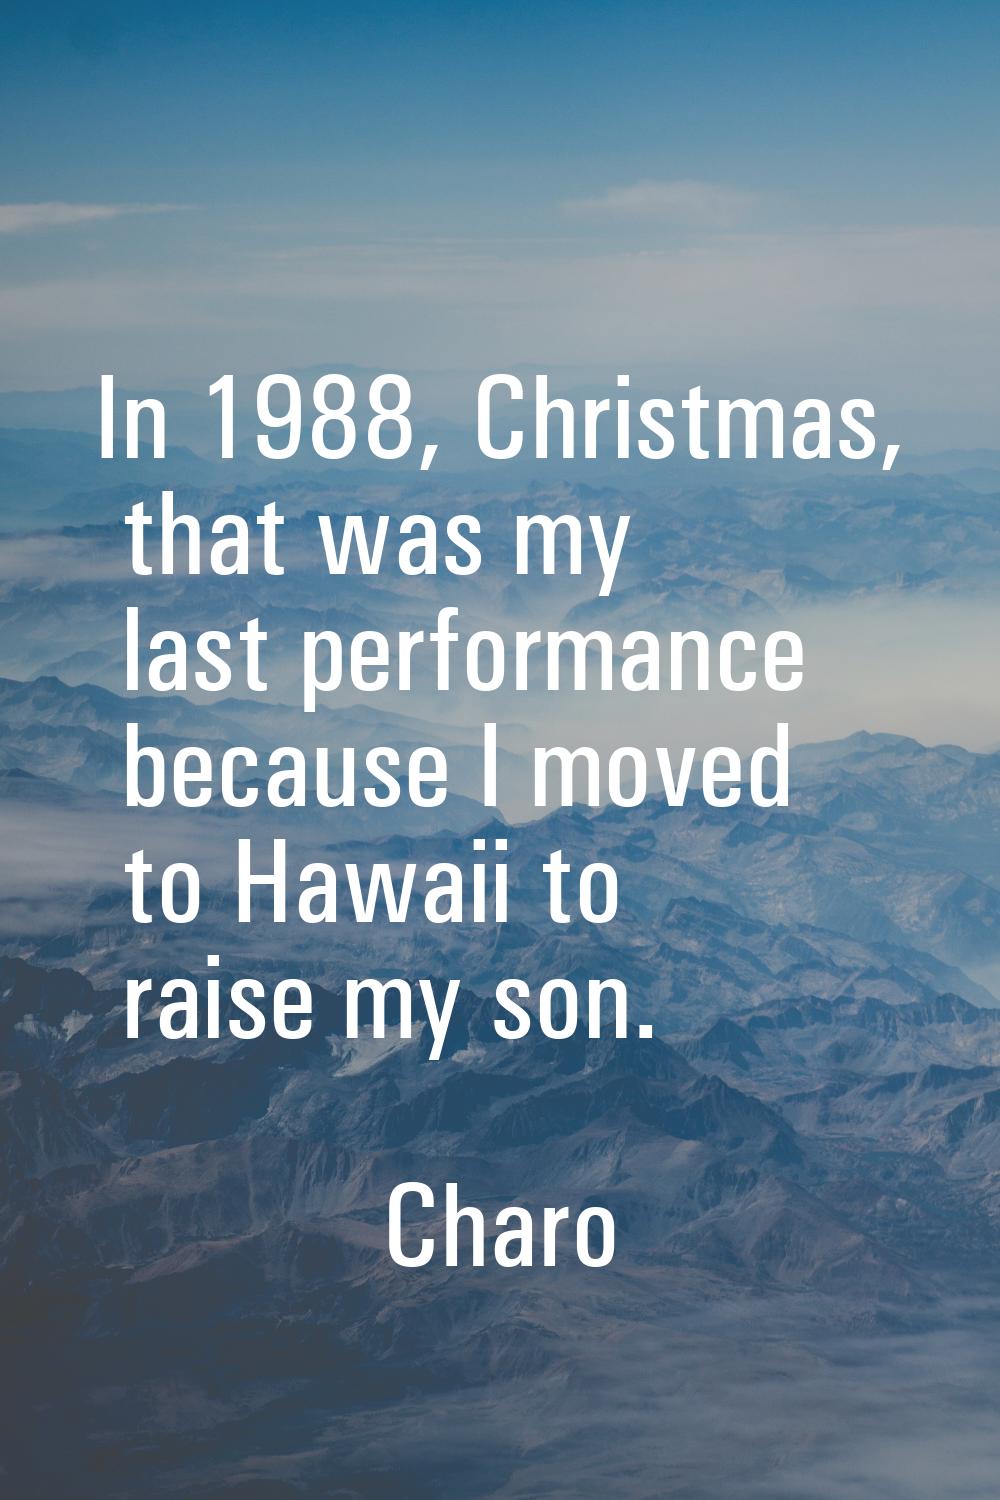 In 1988, Christmas, that was my last performance because I moved to Hawaii to raise my son.